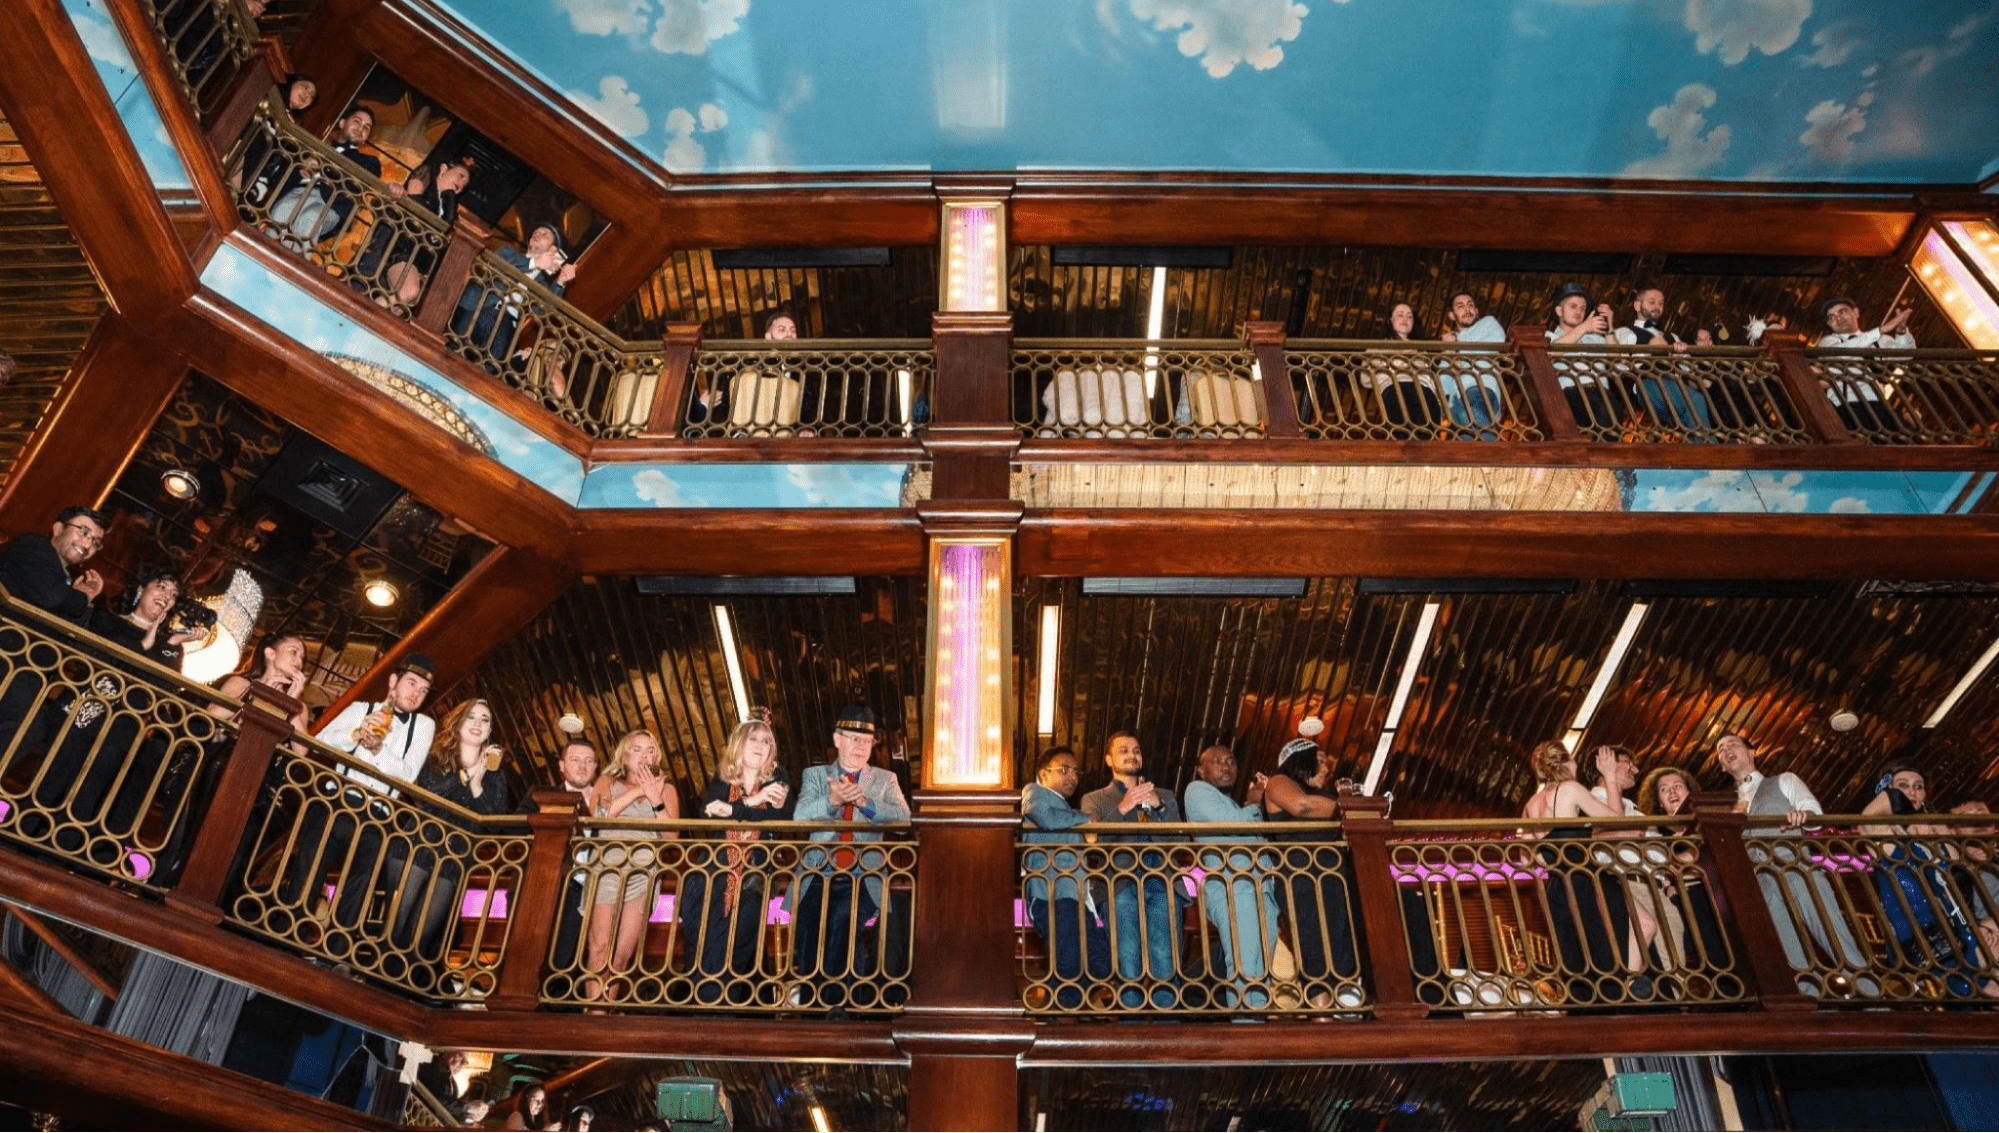 People crowding the balconies at a venue